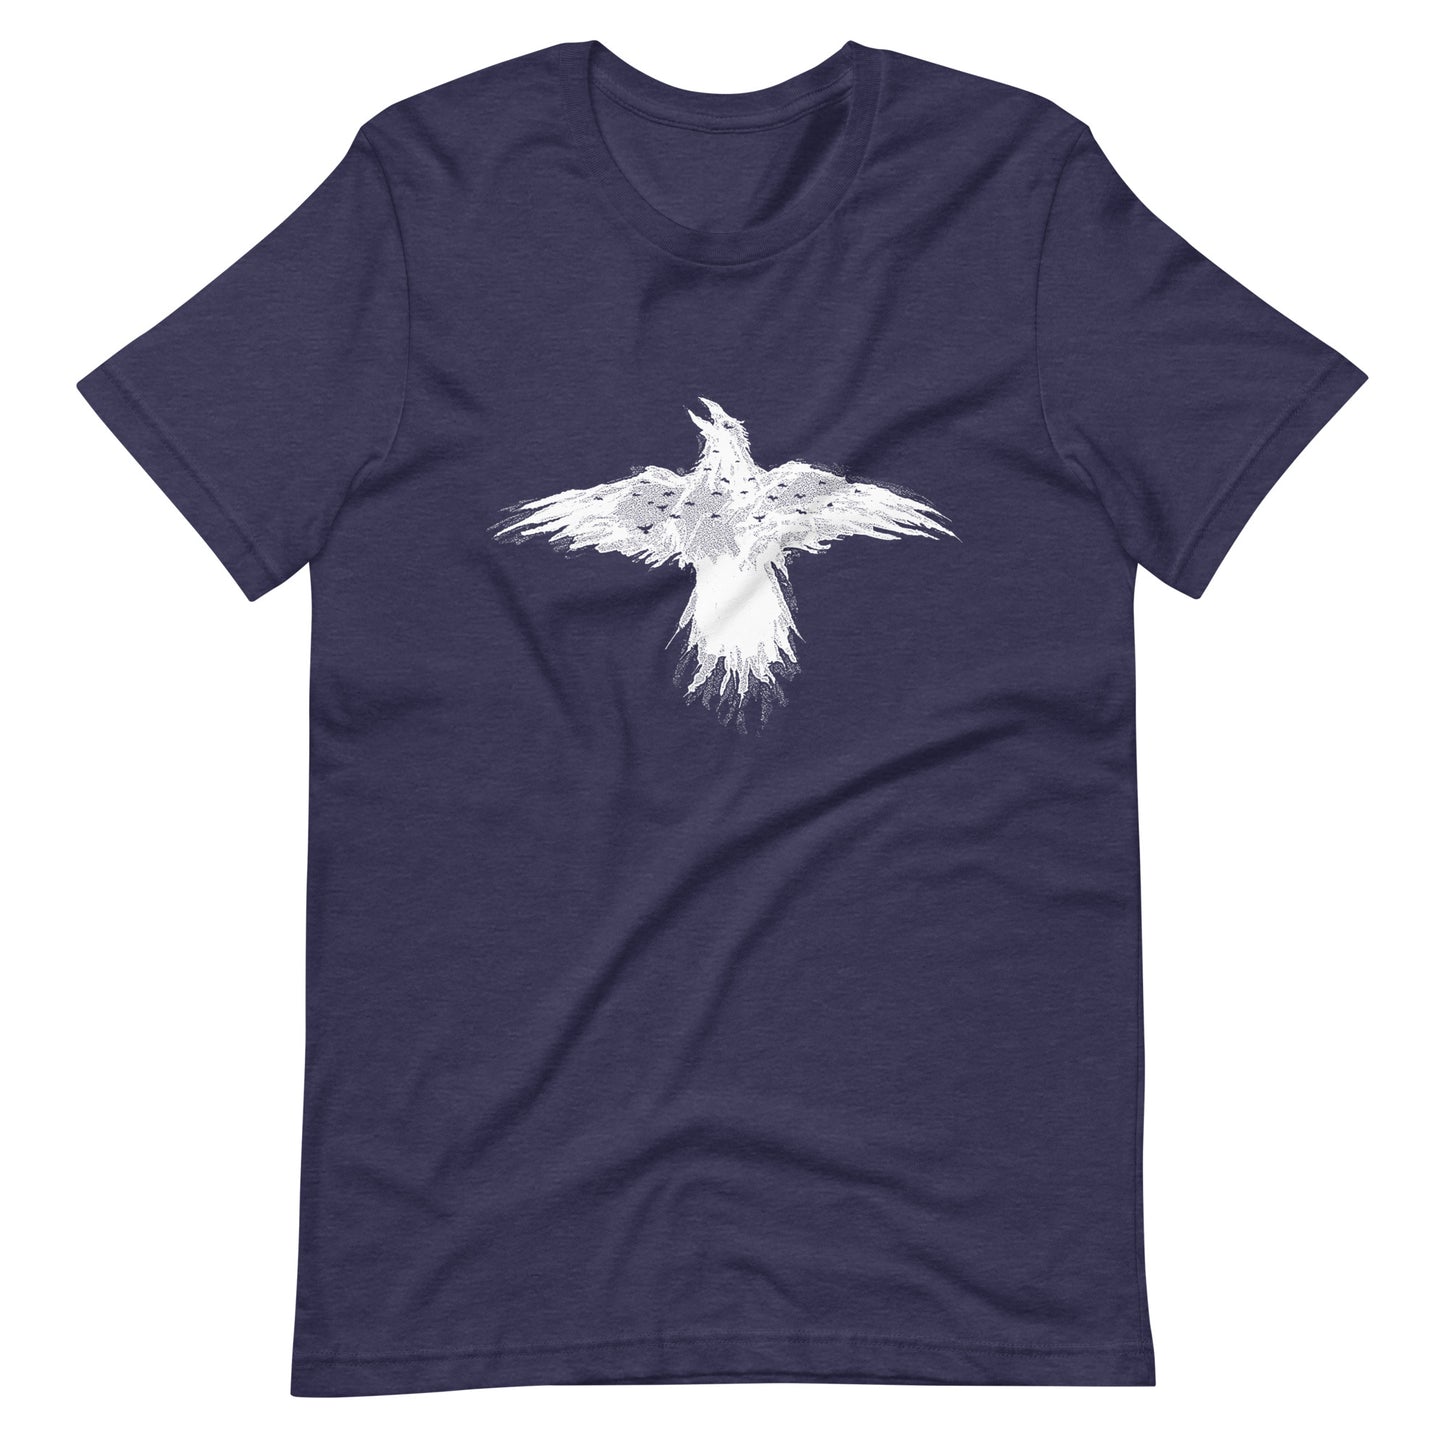 Flying Crow - Men's t-shirt - Heather Midnight Navy Front